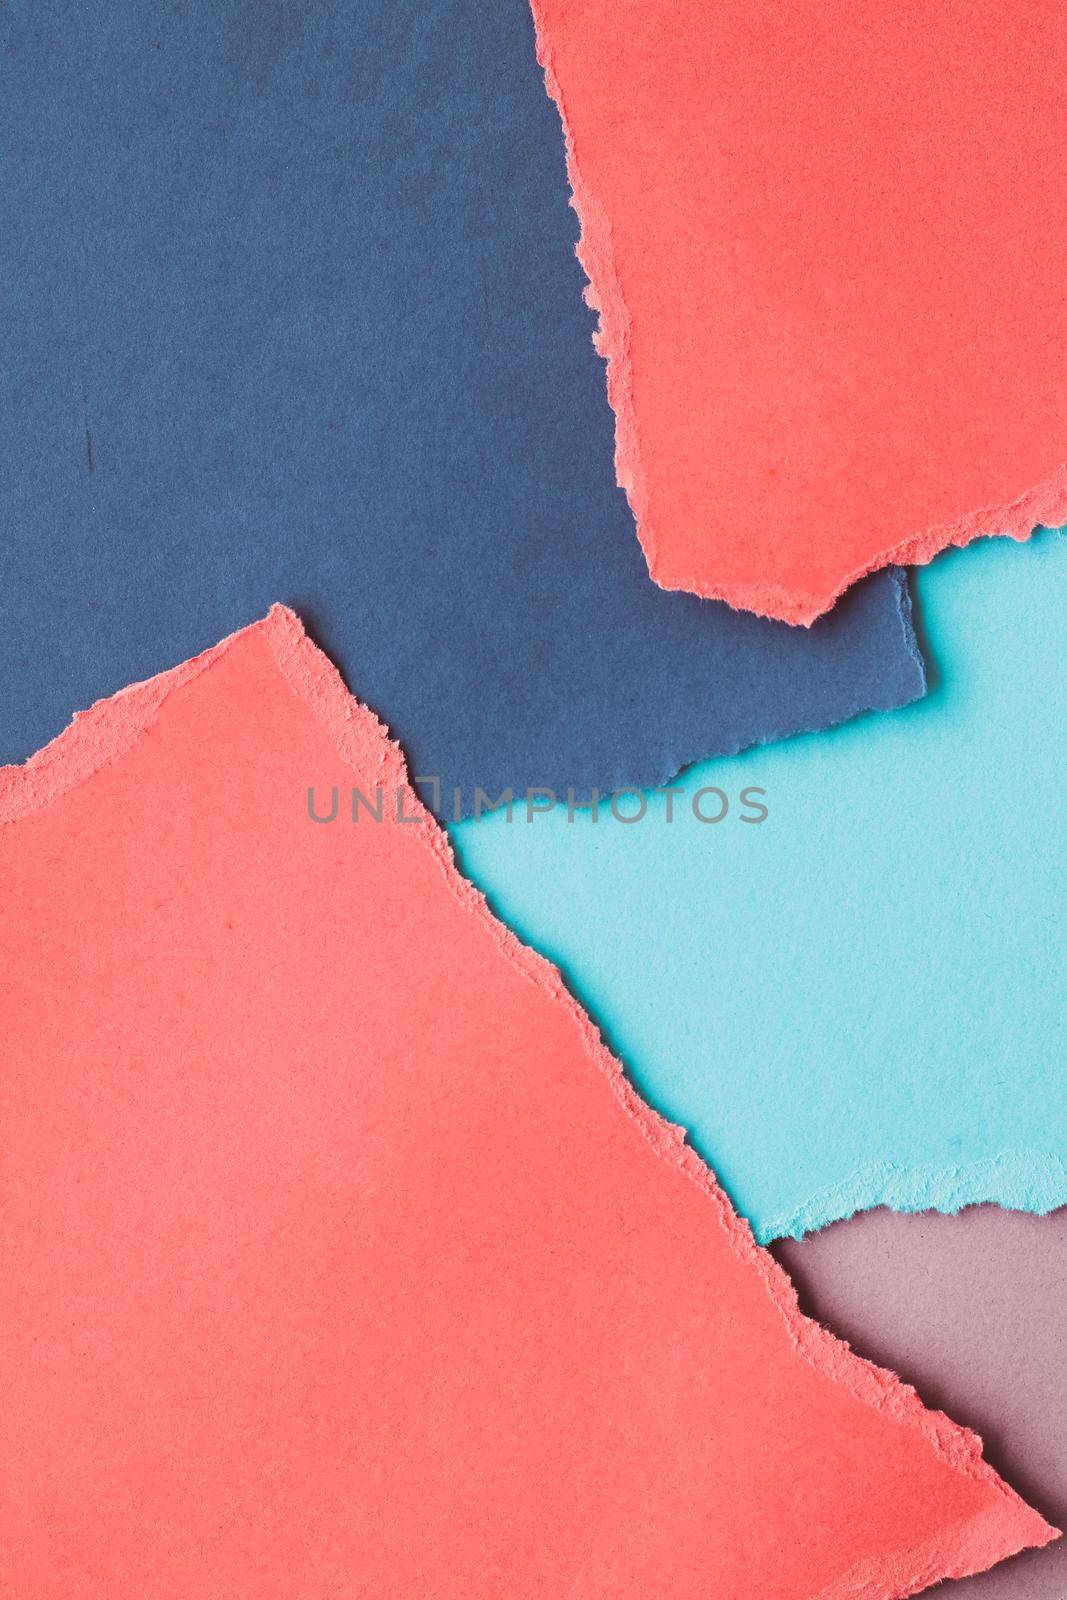 Torn paper textured background, stationery mockup by Anneleven